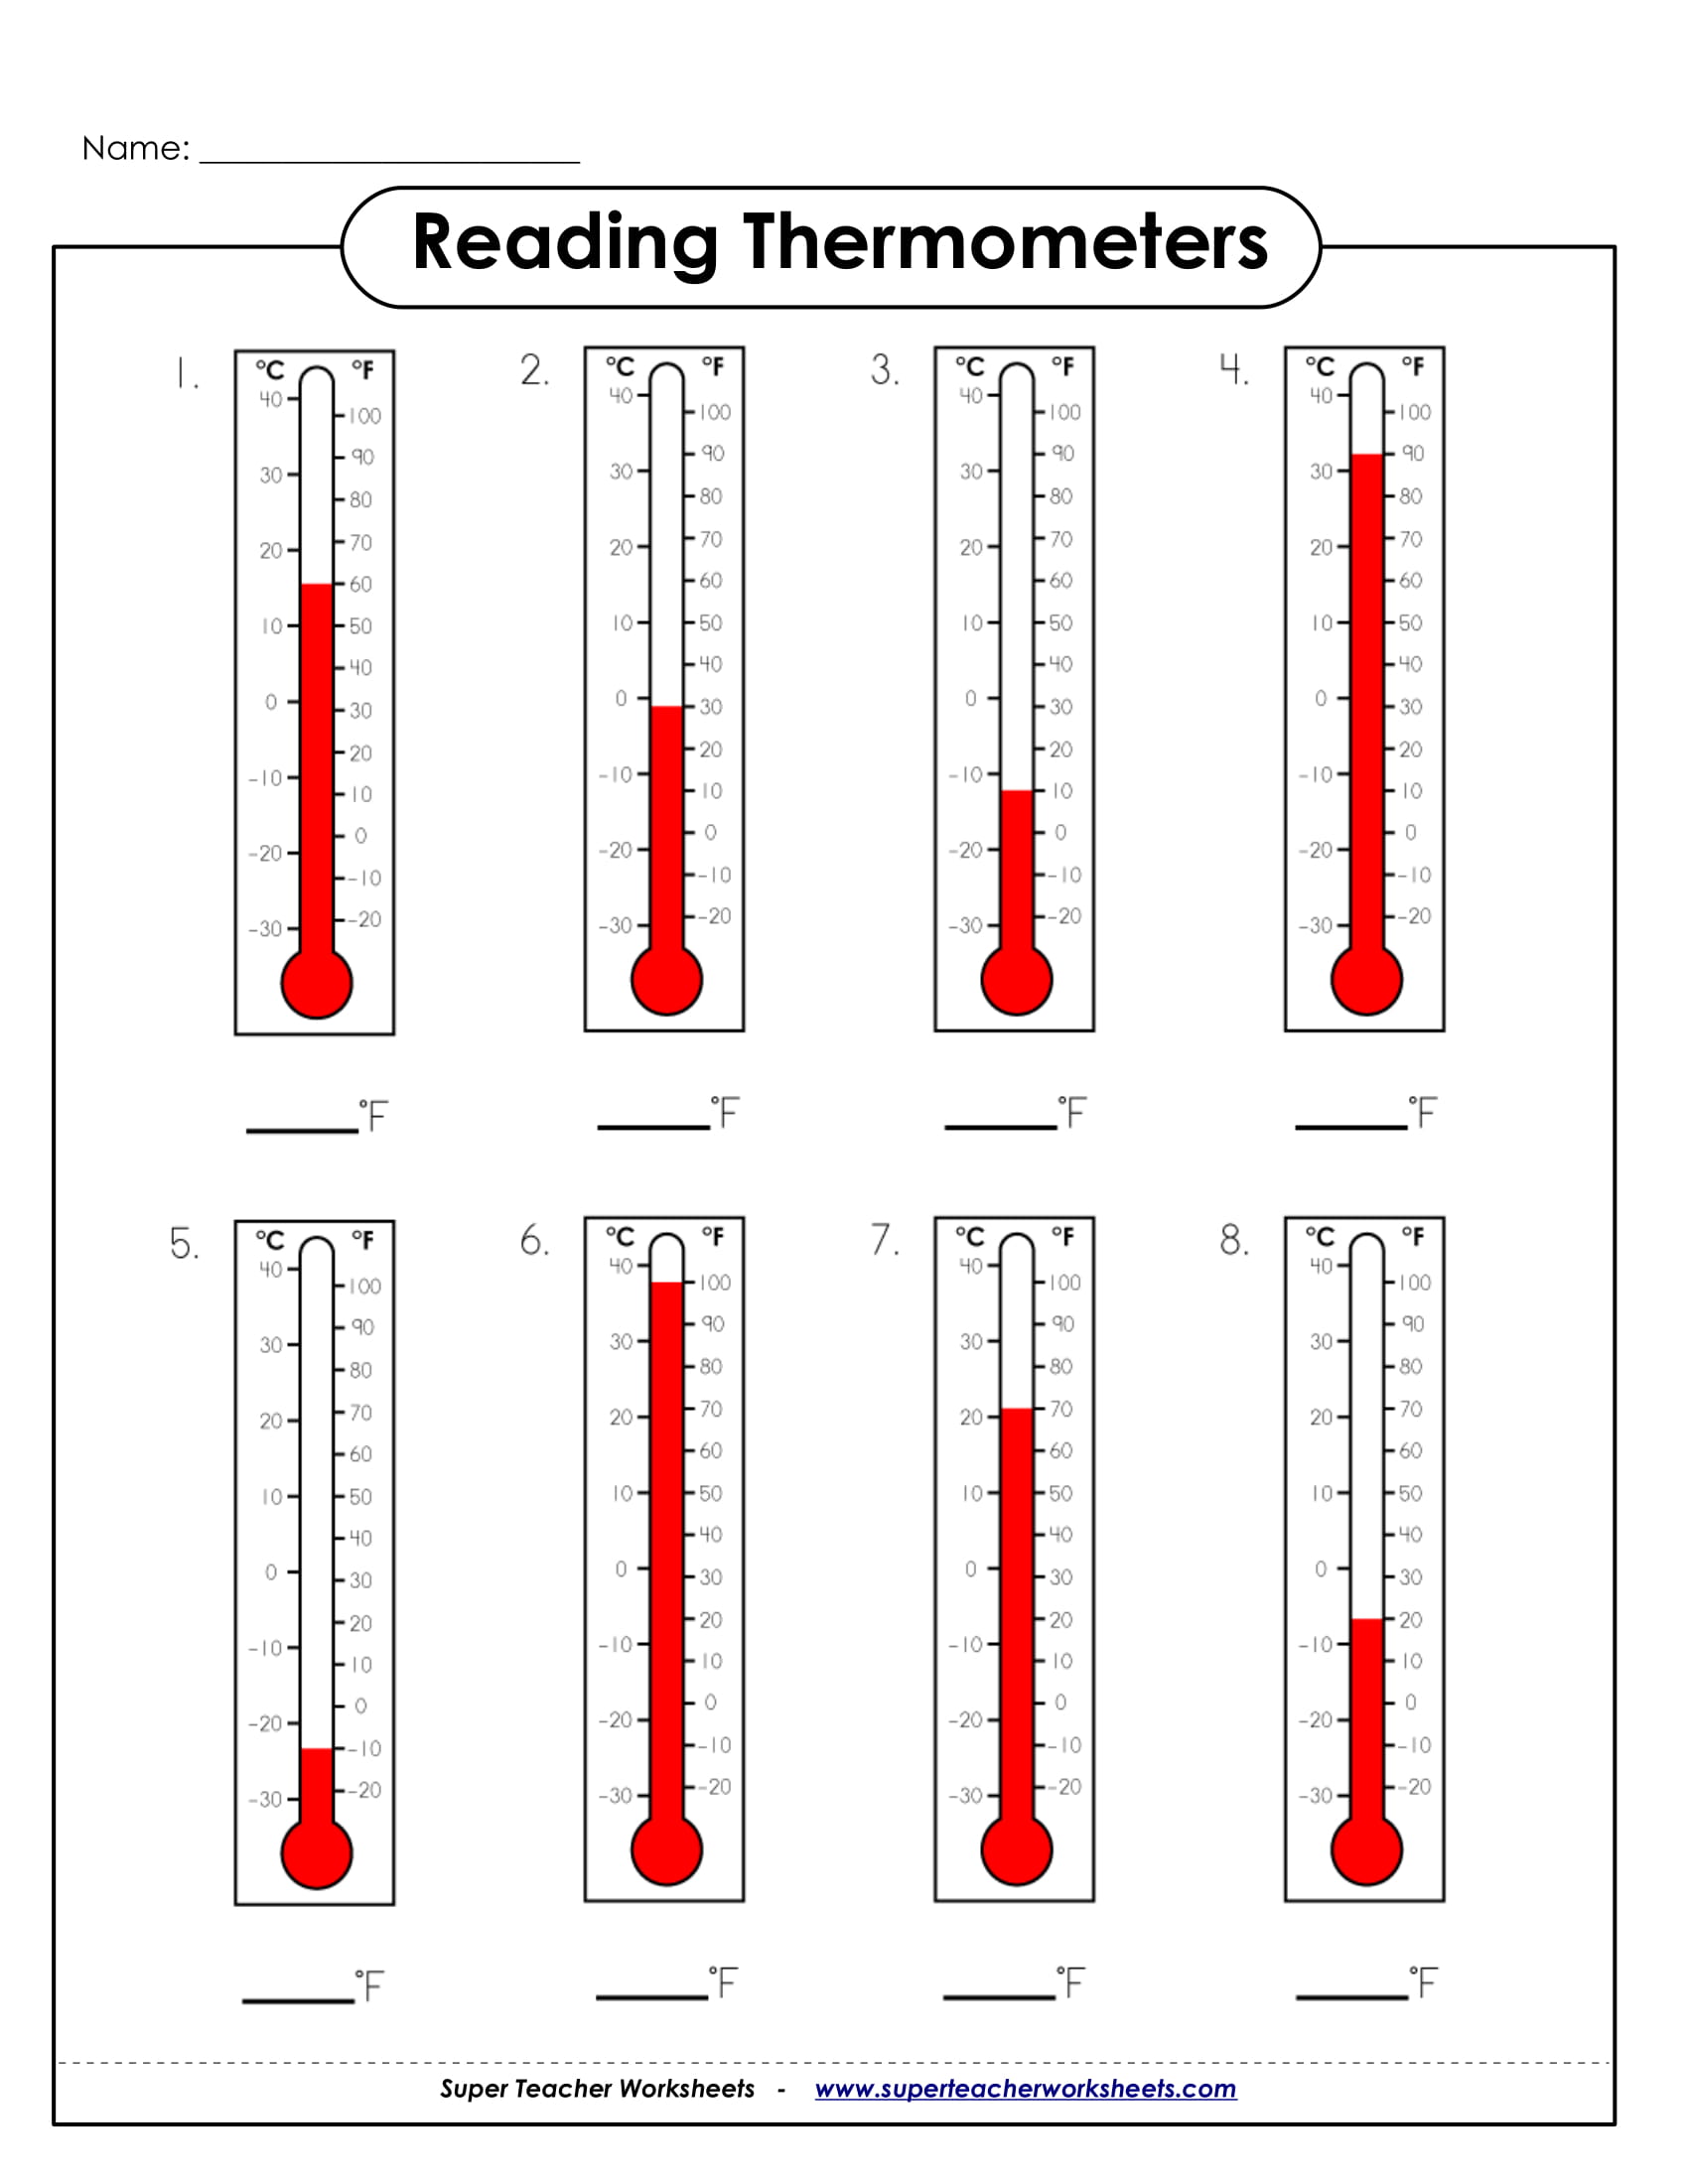 Reading Thermometers Sample Worksheet